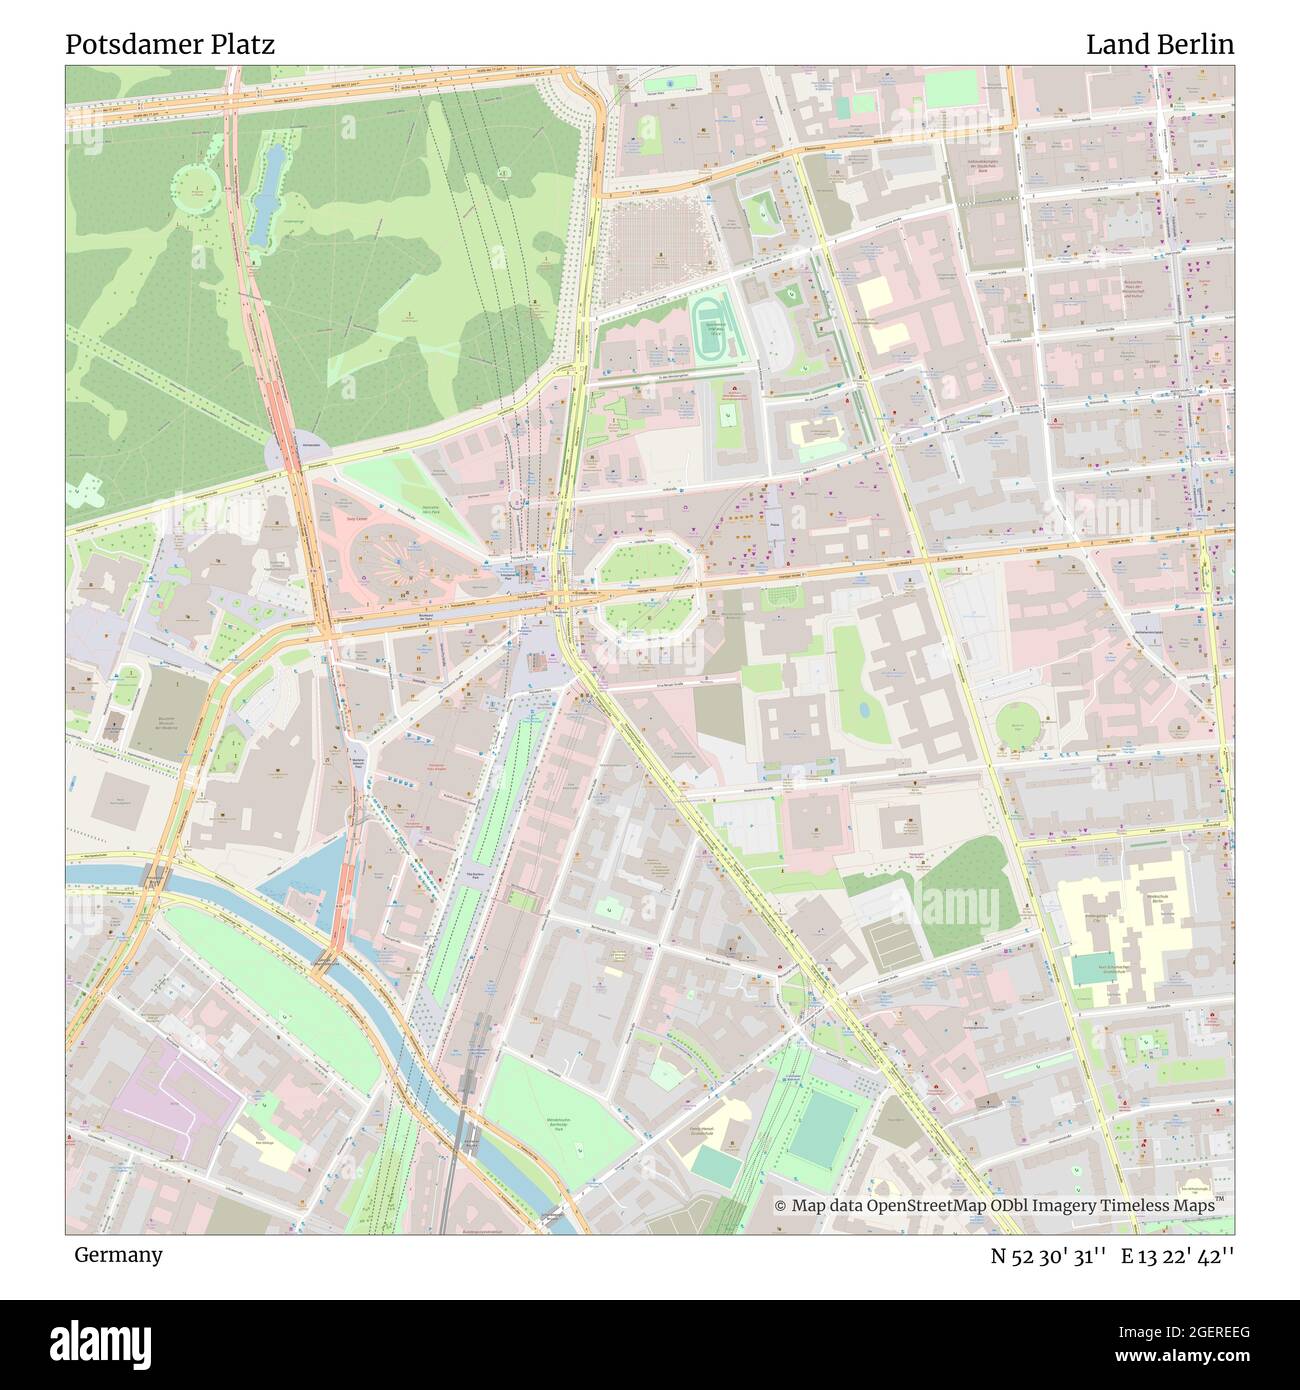 Potsdamer Platz, Germany, Land Berlin, N 52 30' 31'', E 13 22' 42'', map,  Timeless Map published in 2021. Travelers, explorers and adventurers like  Florence Nightingale, David Livingstone, Ernest Shackleton, Lewis and